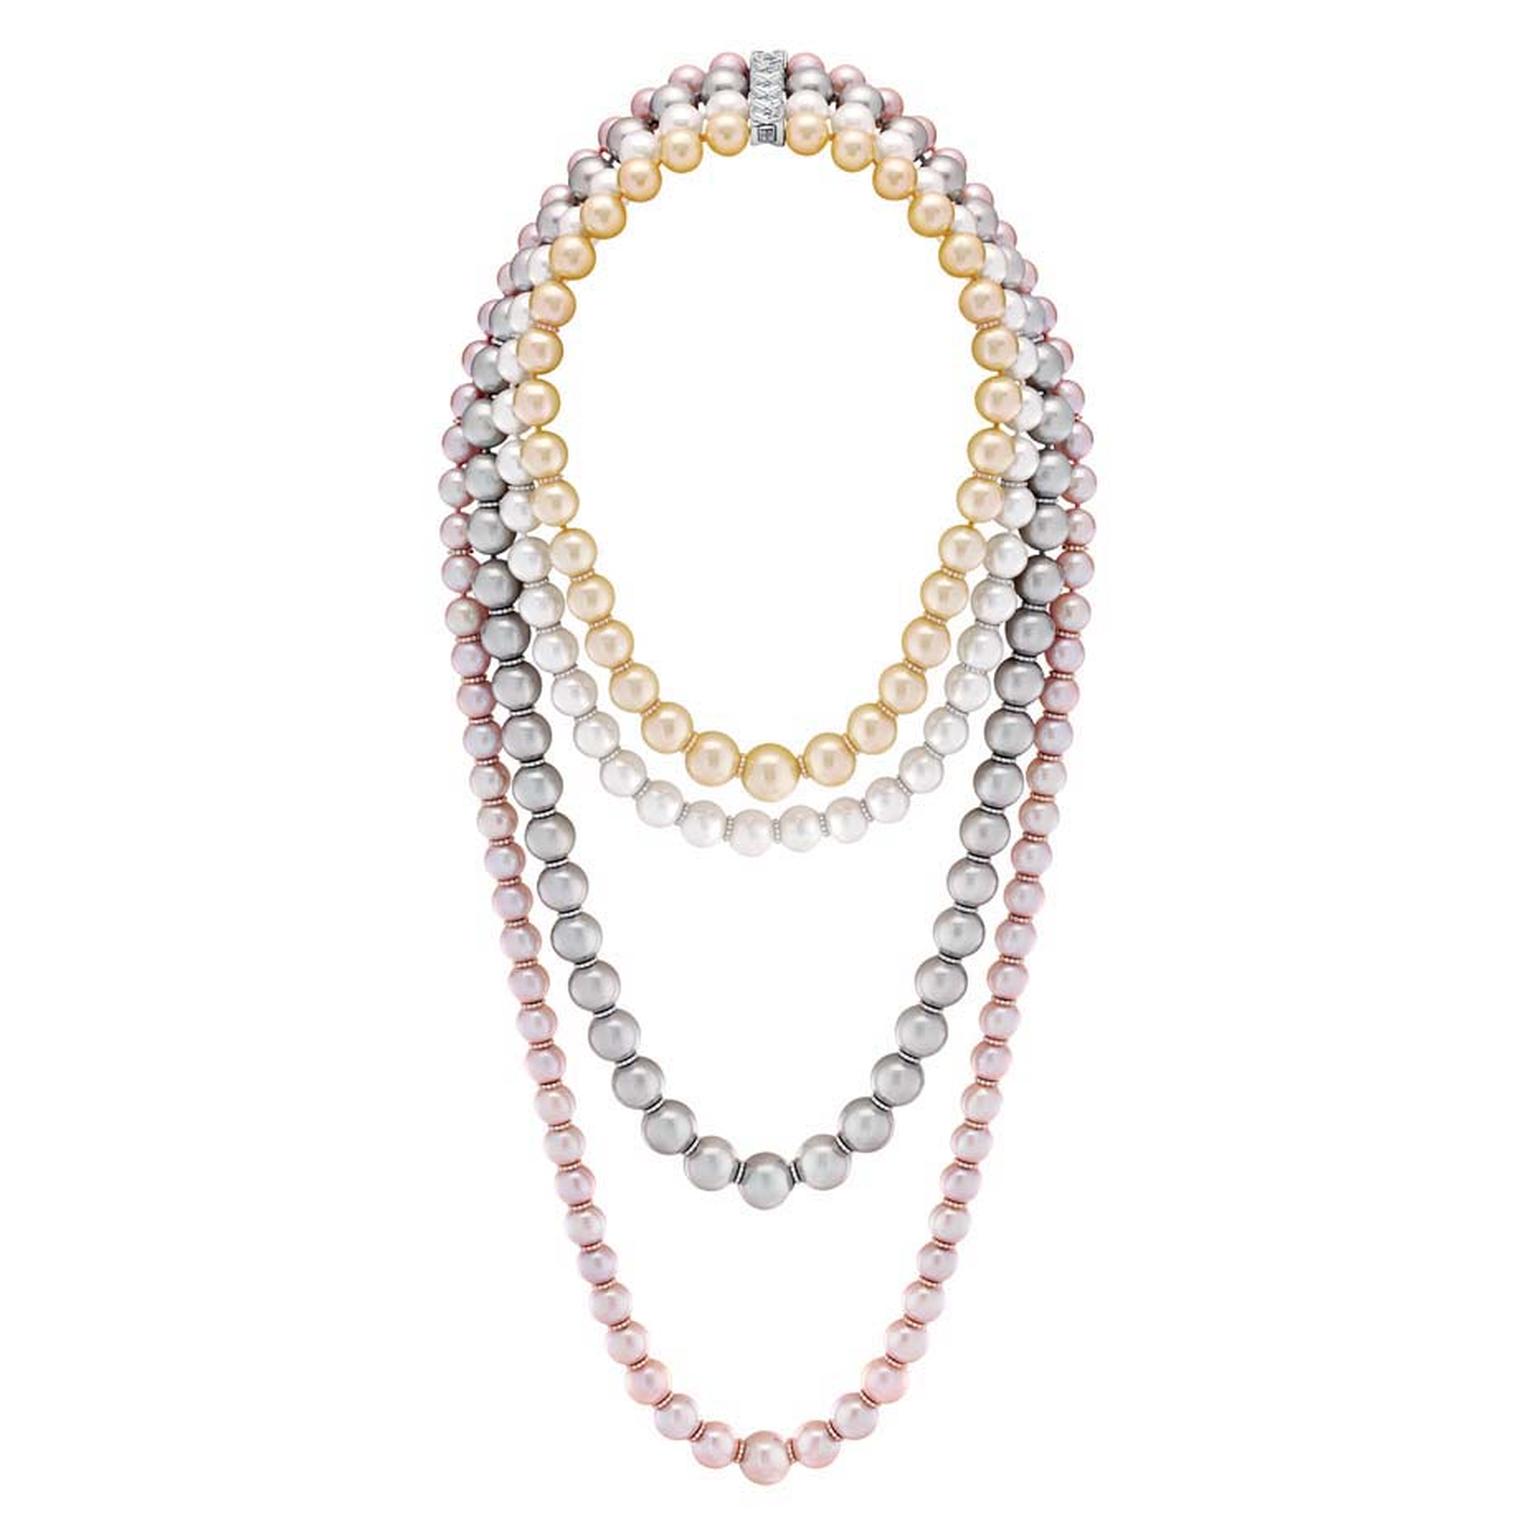 Chanel Perles Swing necklace from the Les Perles de Chanel collection launched in 2014, set with brilliant-cut diamonds, 72 South Sea cultured pearls, 49 Tahitian cultured pearls and 75 freshwater cultured pearls.